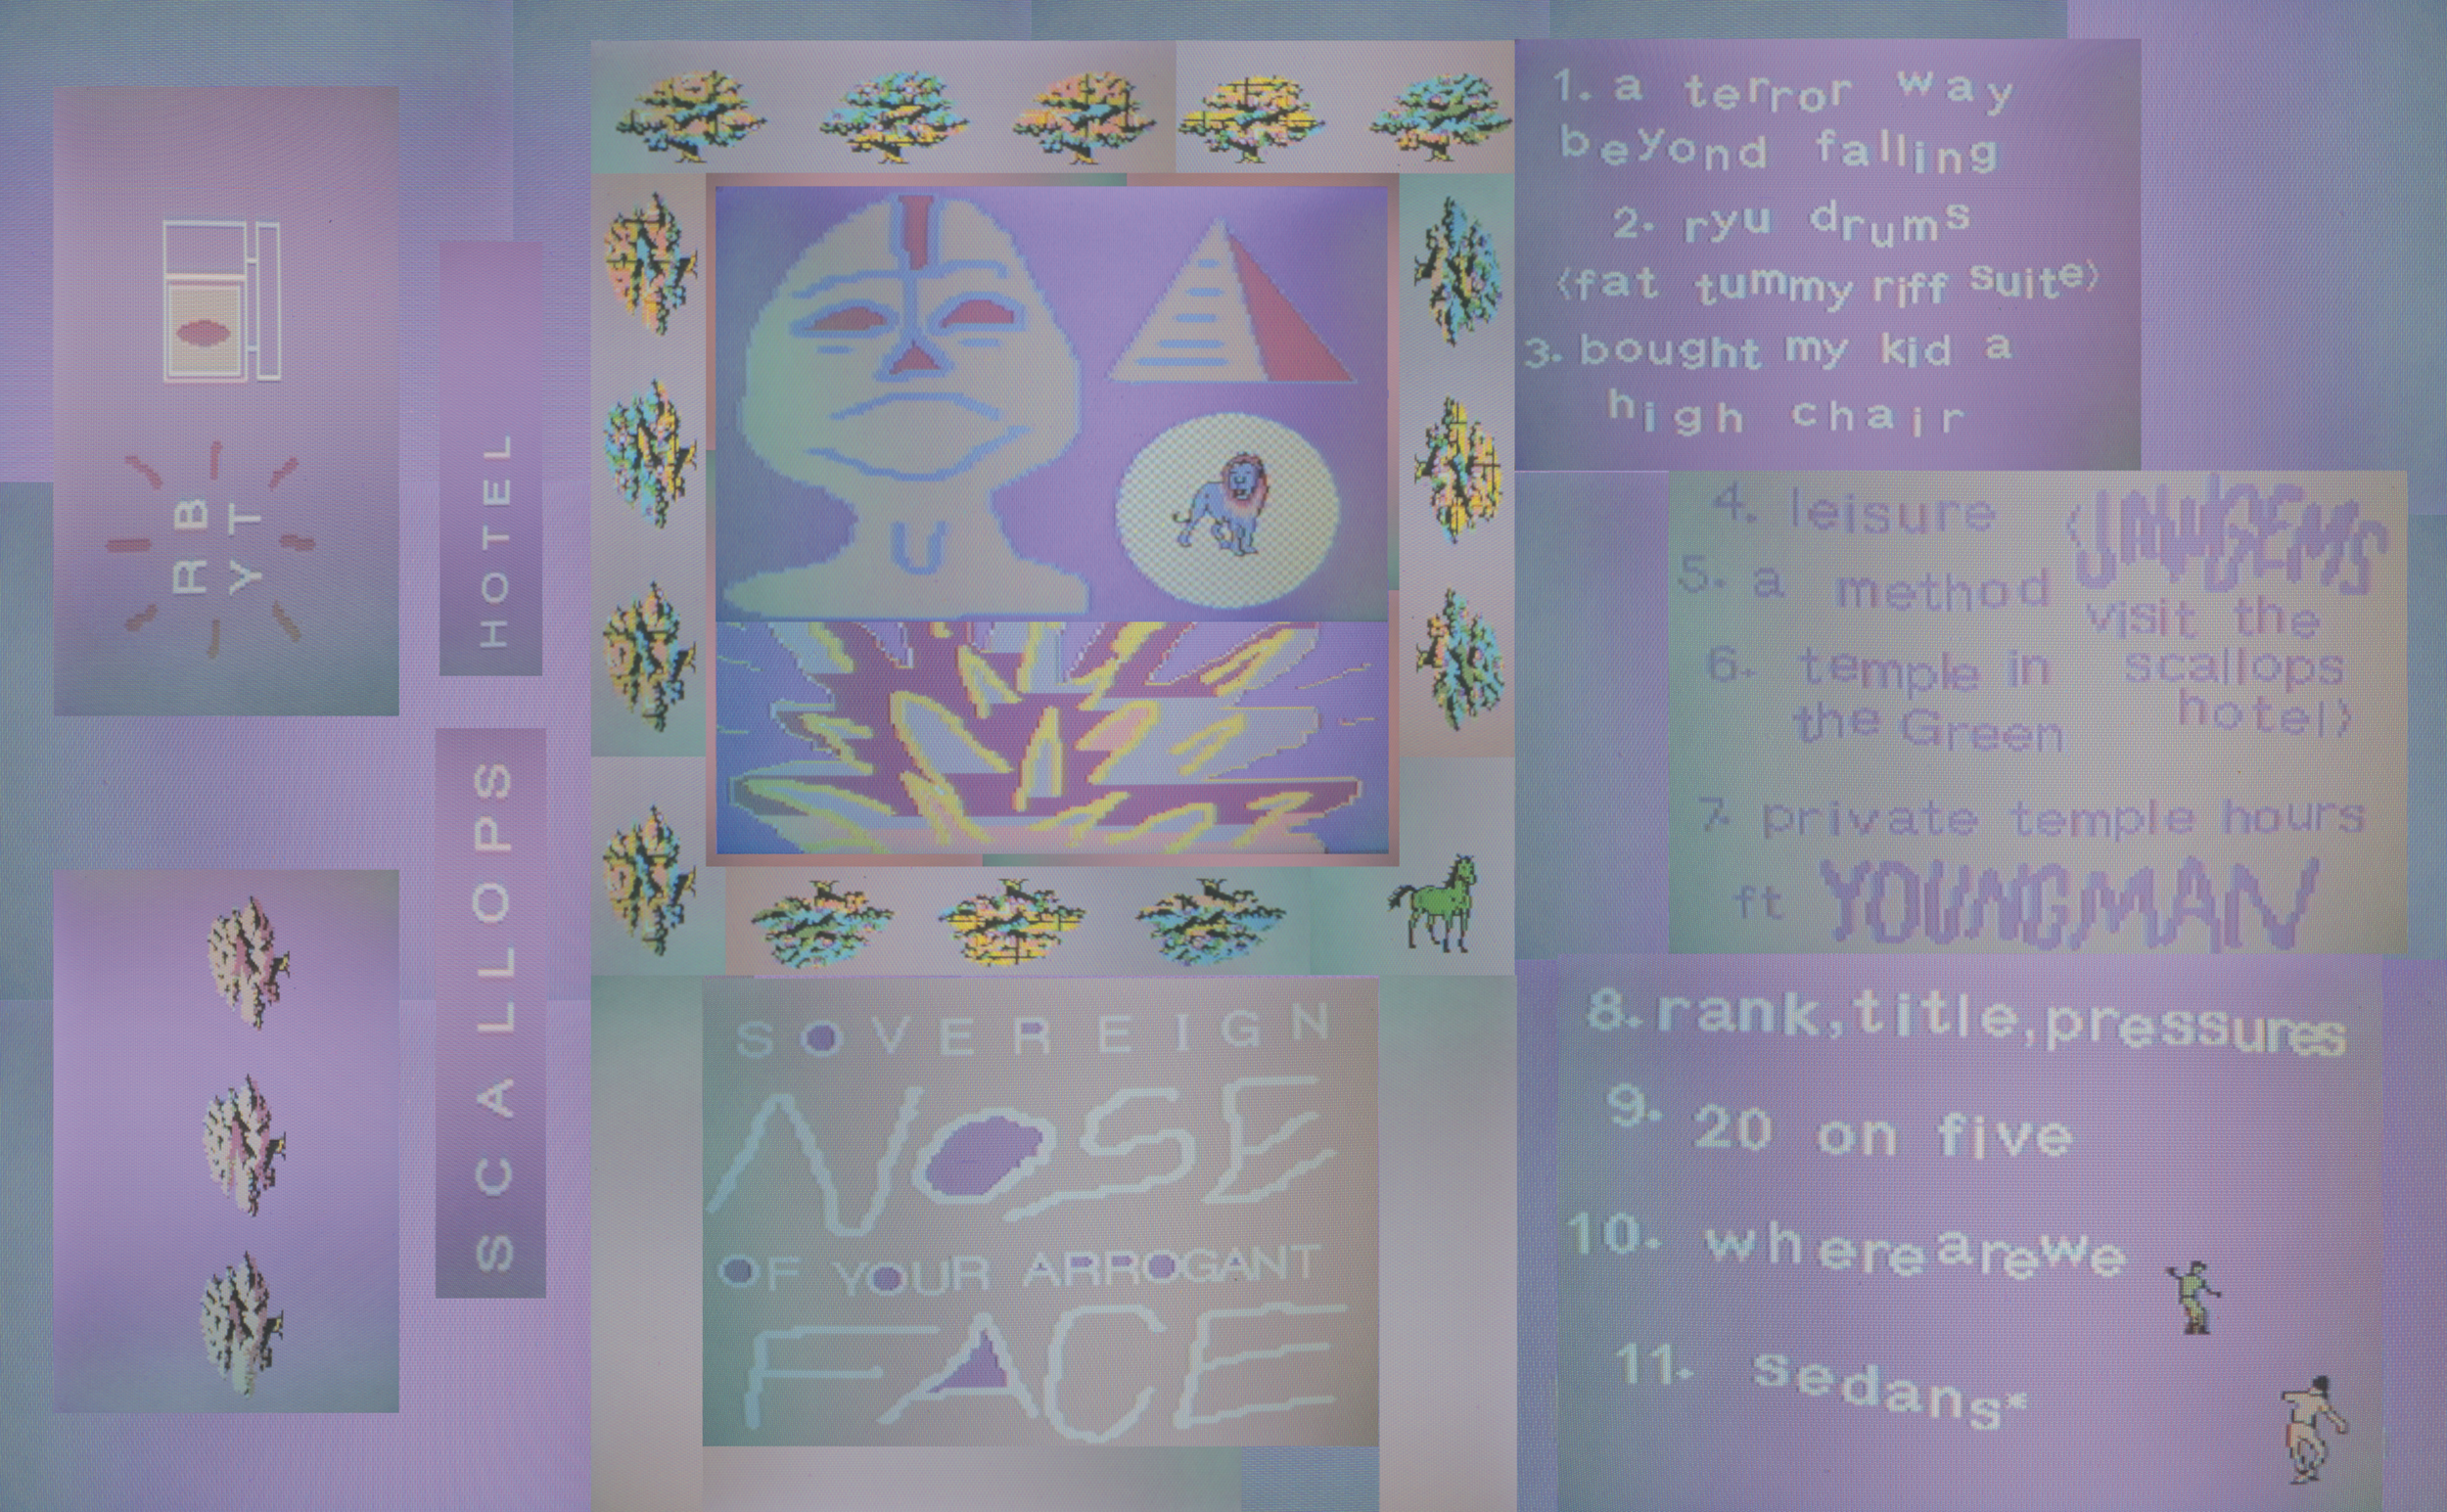 sovereign nose of your arrogant face - scallops hotel